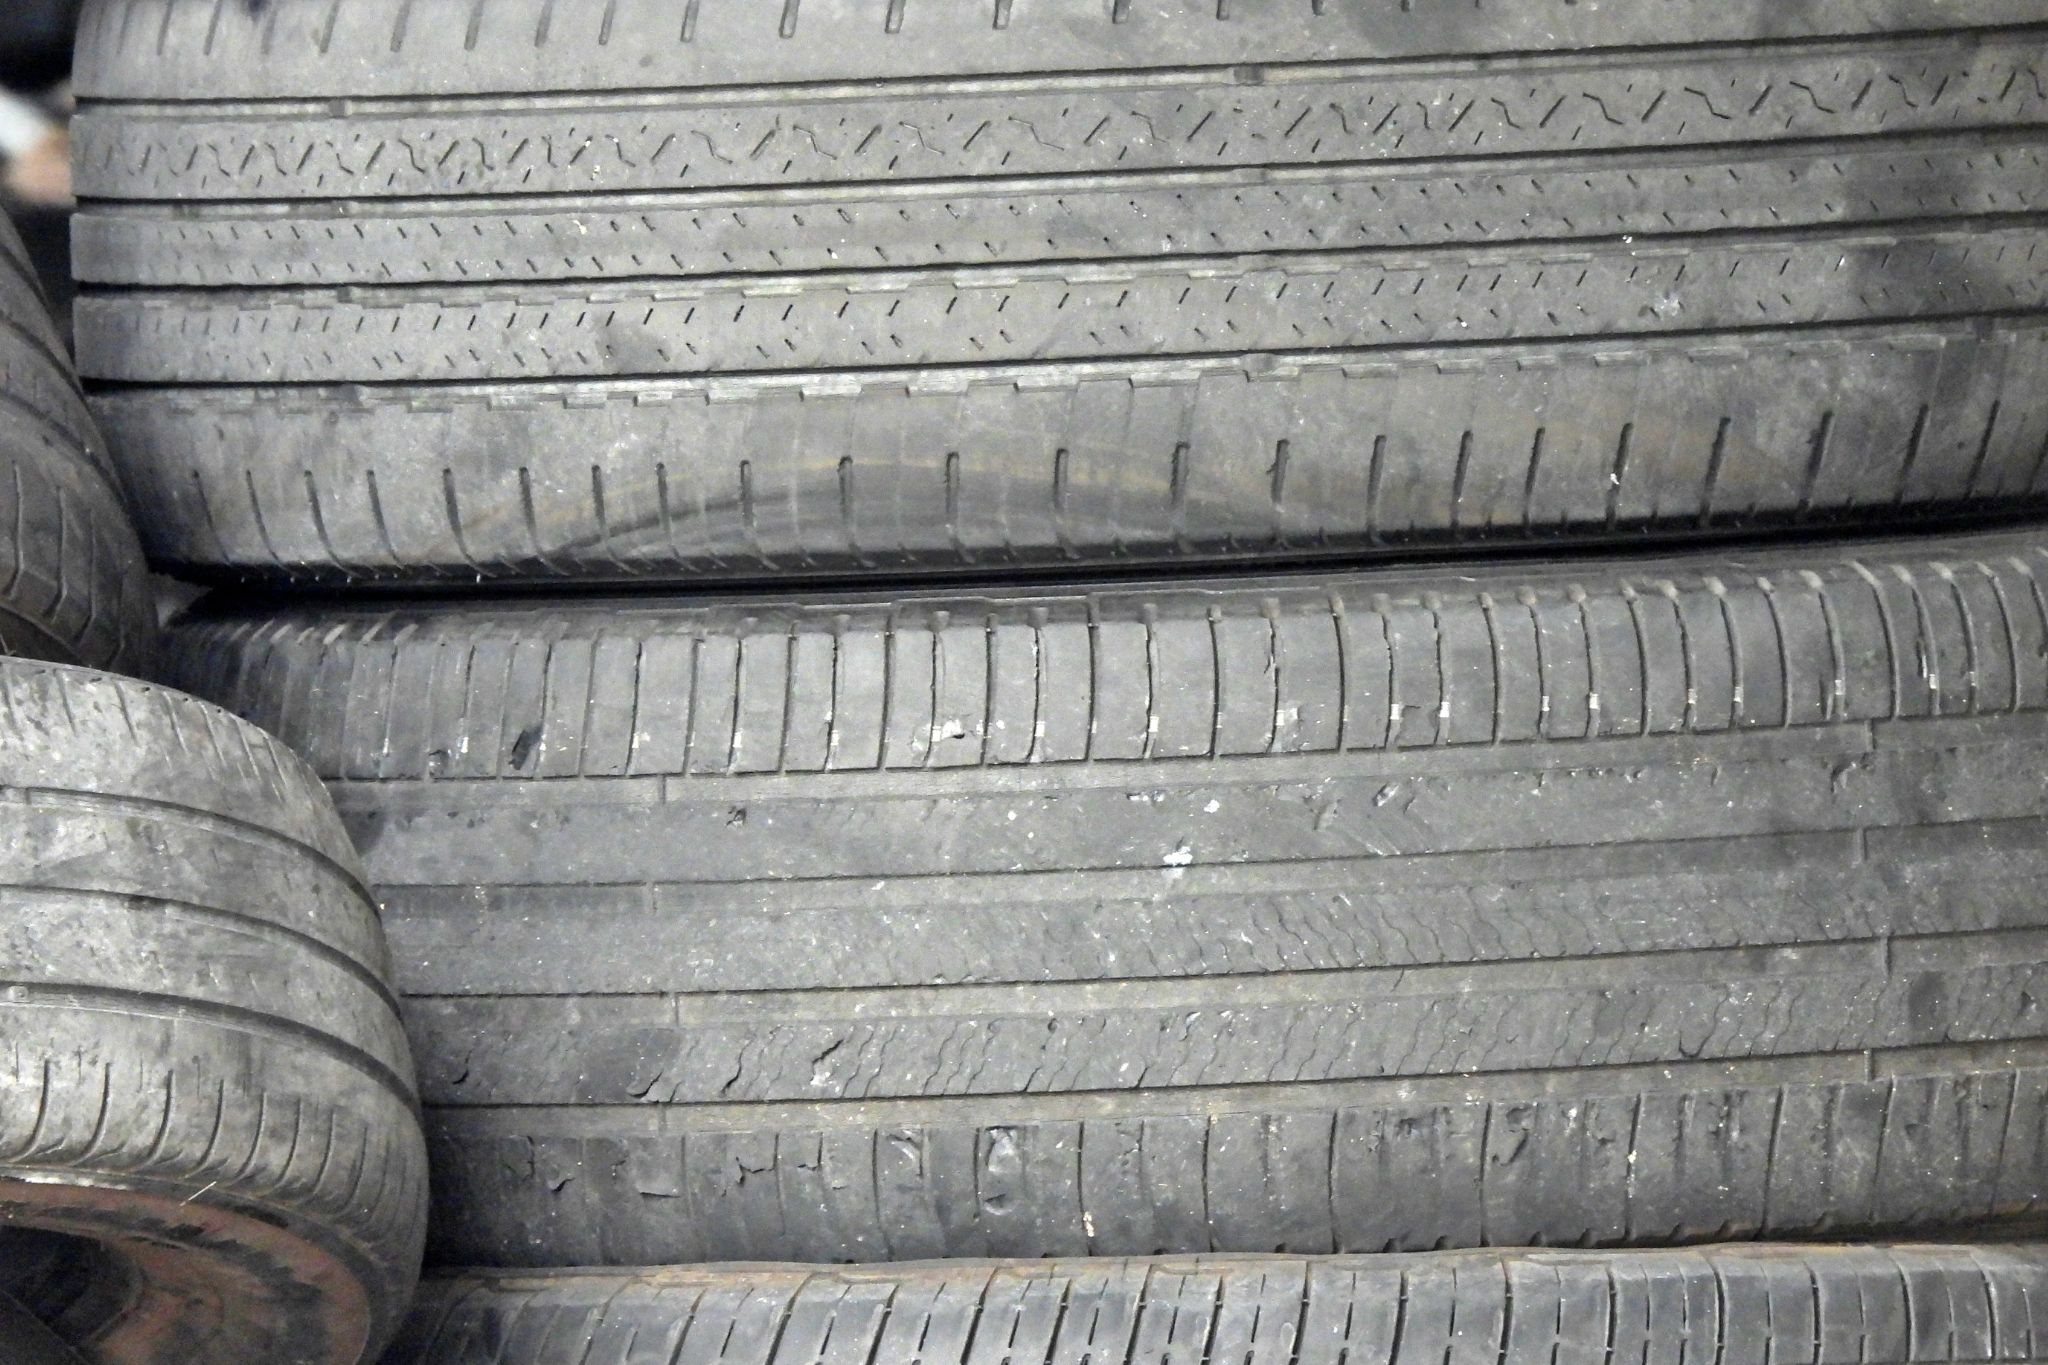 Can Uneven Tire Wear Cause Scraping Noise [Find Out NOW]